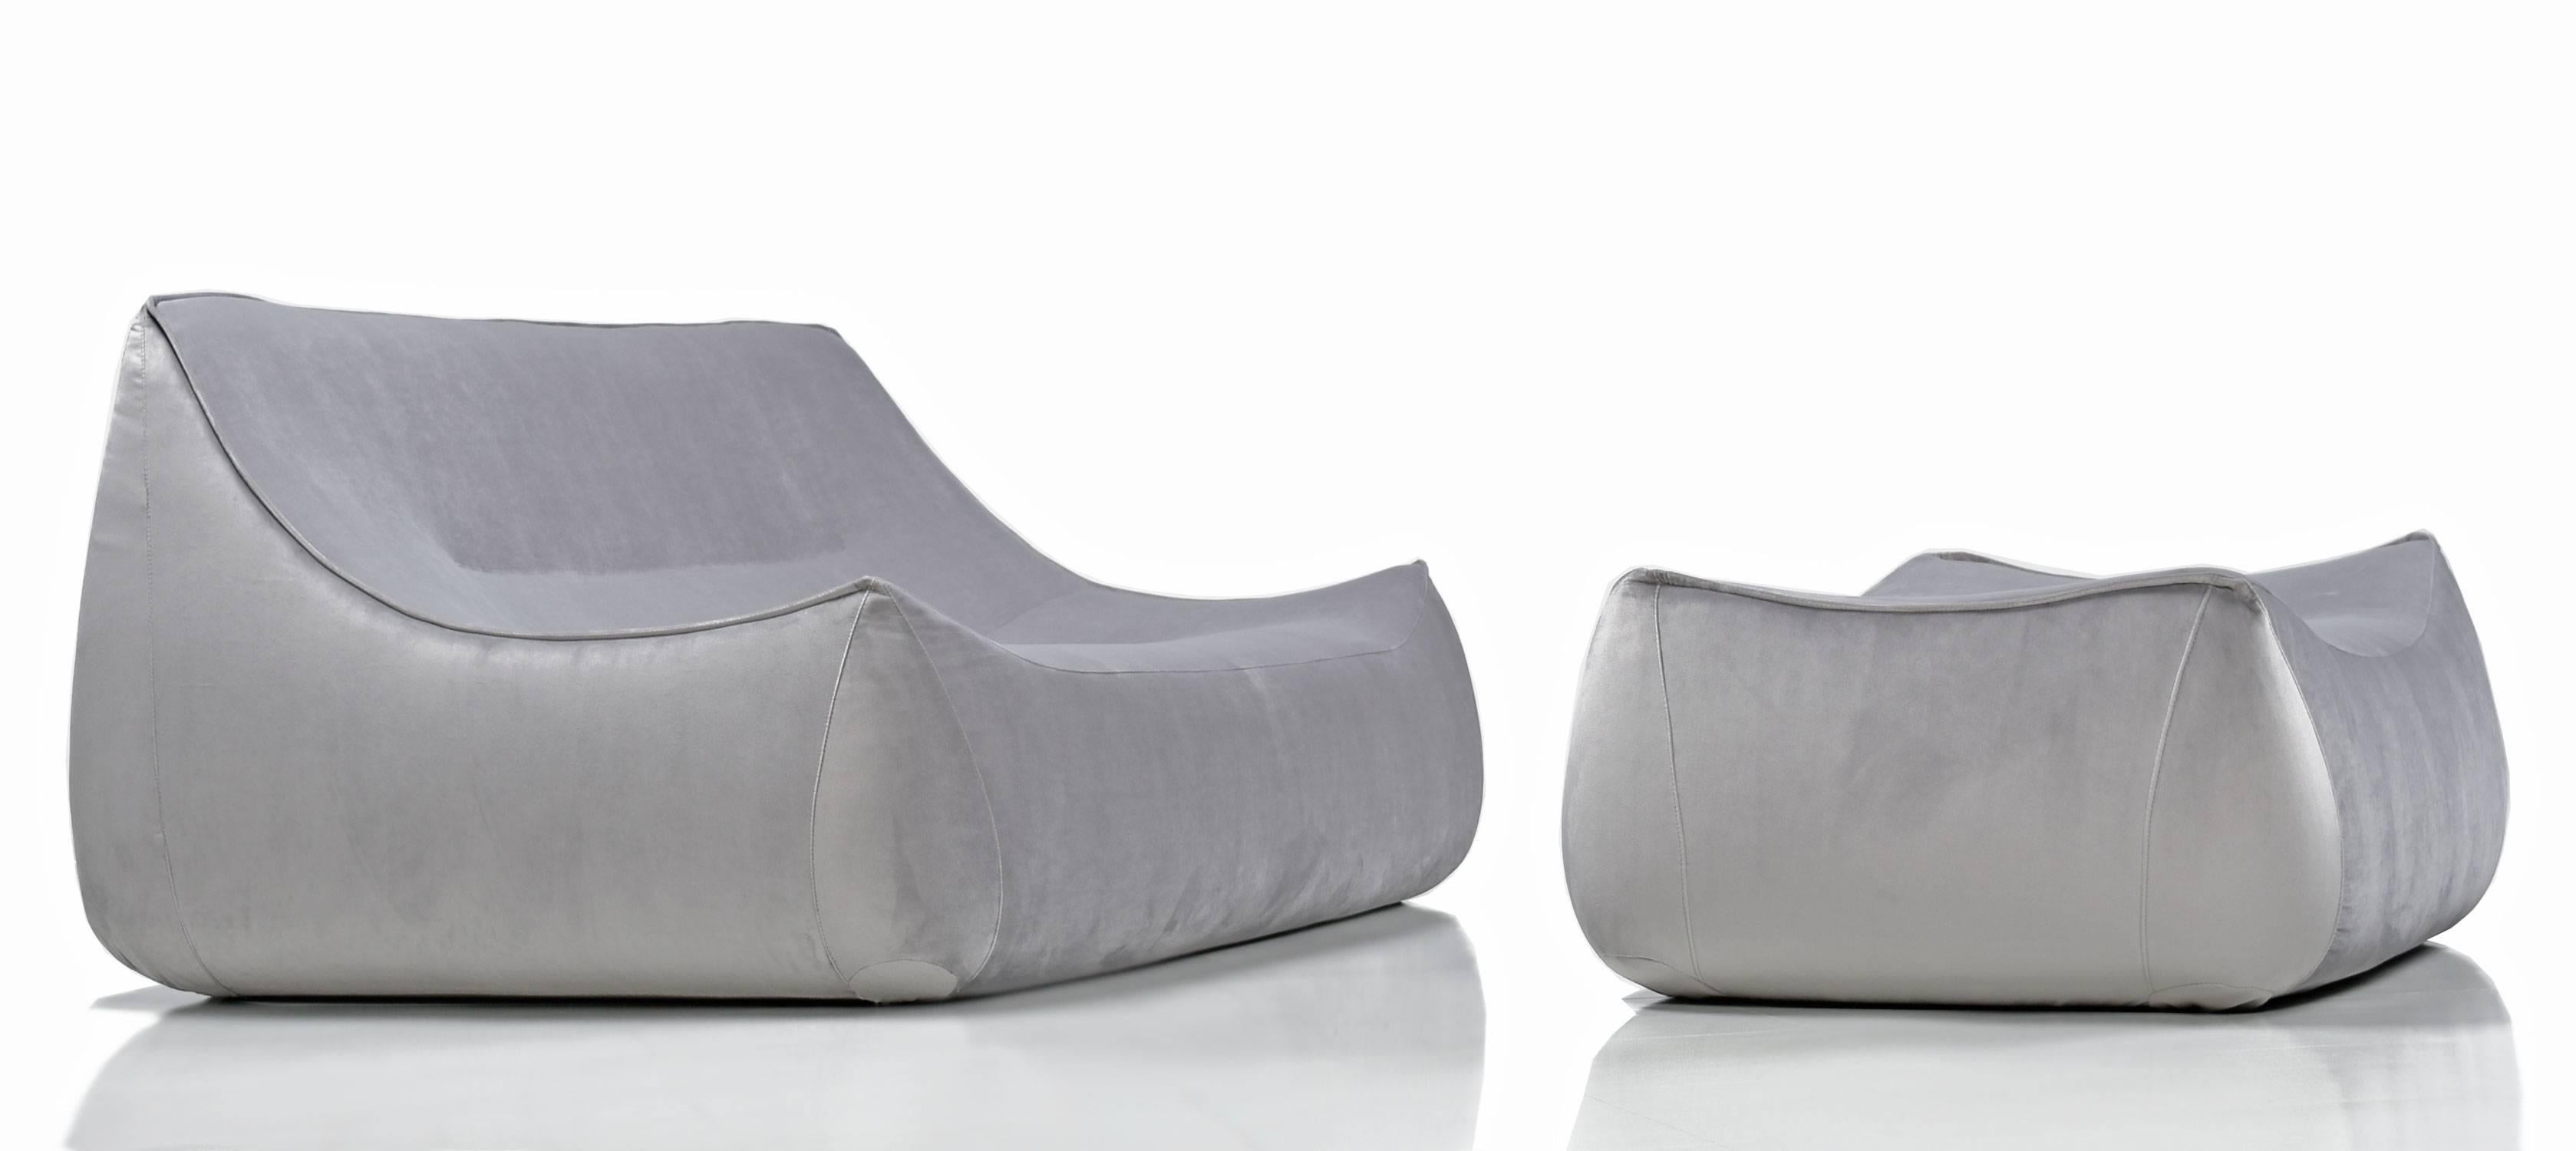 Vintage Ligne Roset sake settee with matching ottoman. The sake was a limited release by French company Ligne Roset designed, by Pascal Mourgue, and is no longer available. The sake emulates the leaf-like design of Ligne Roset's staple